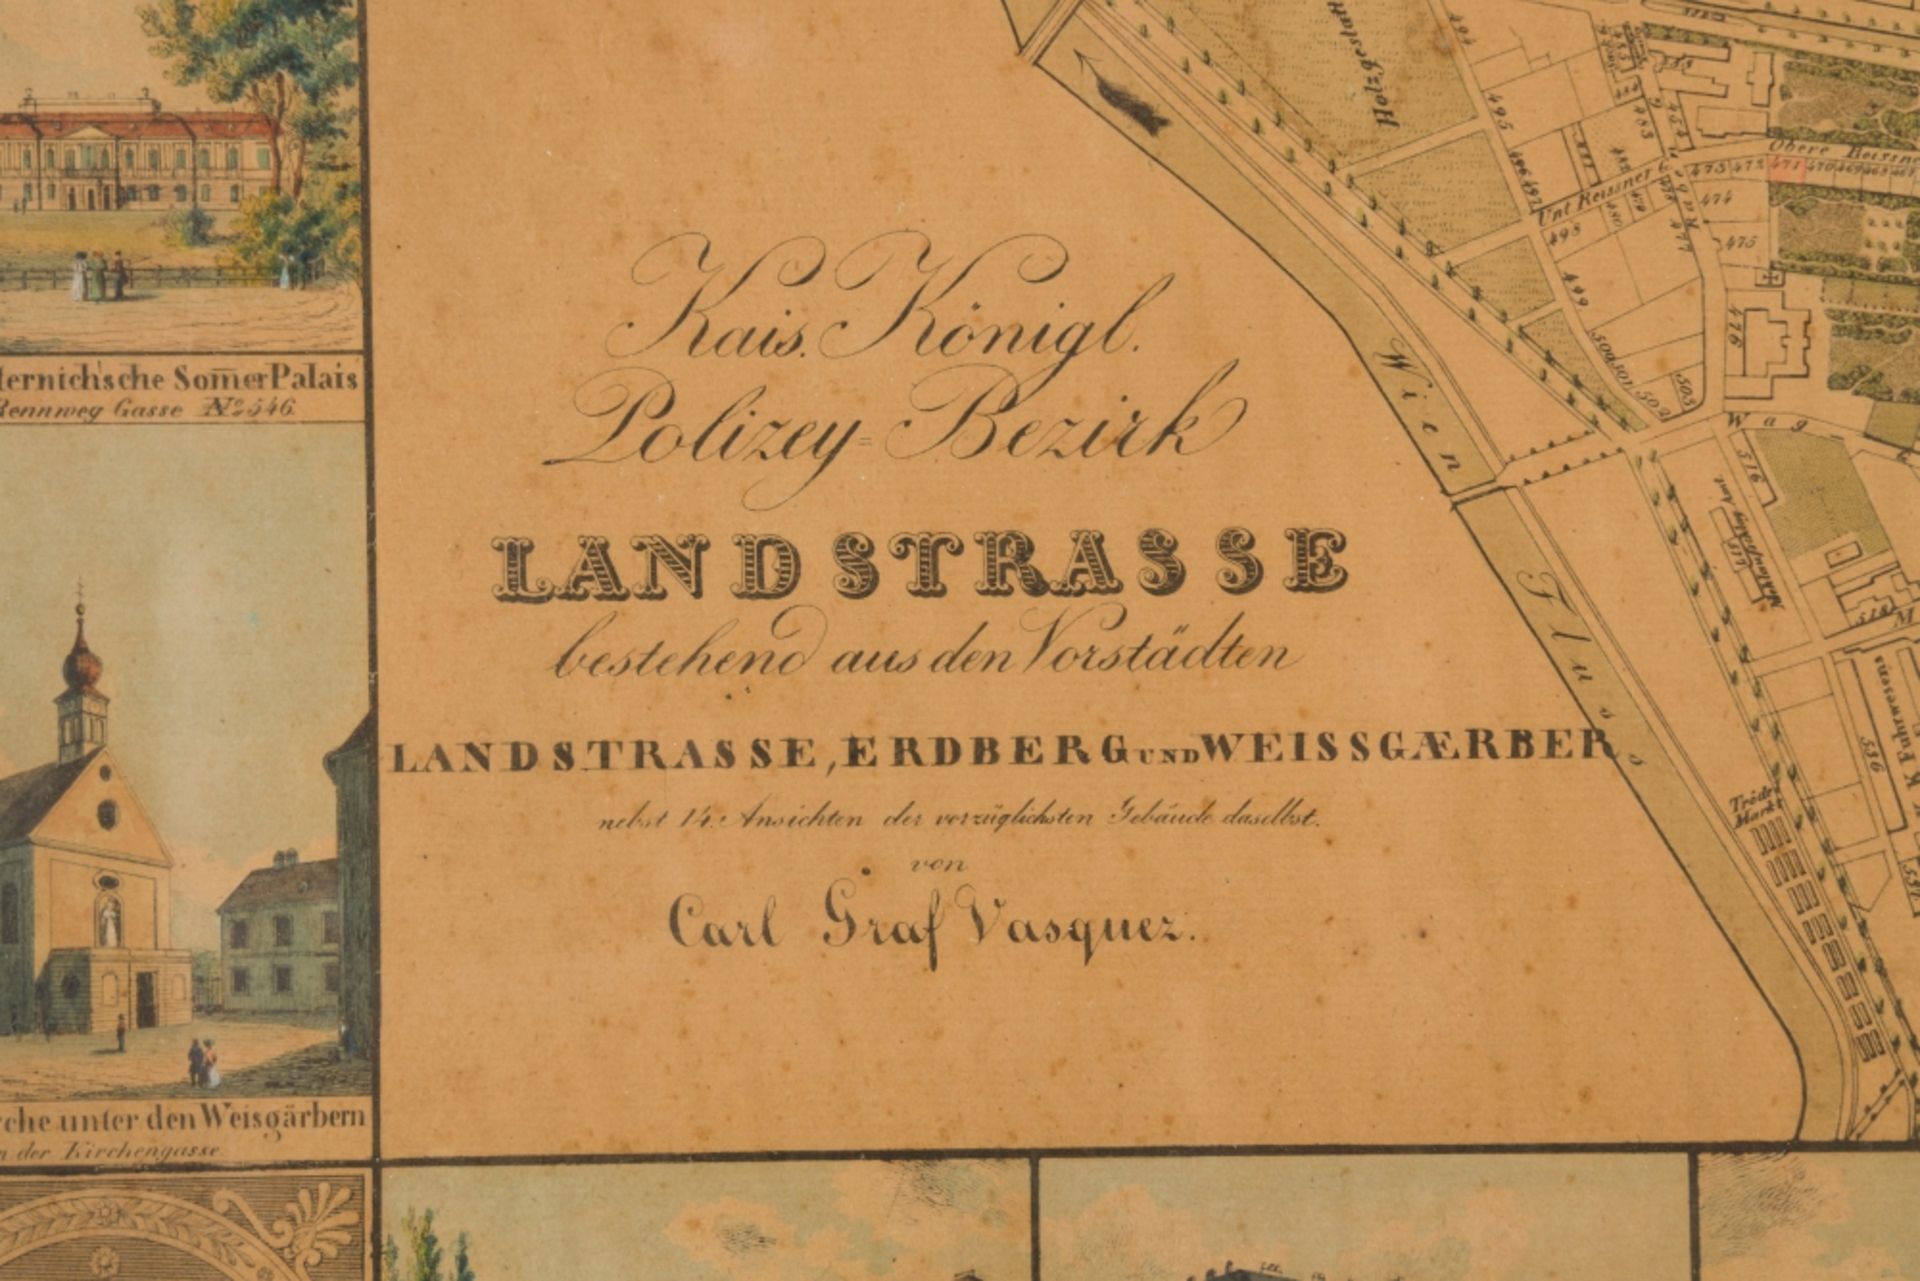 Vasquez, Carl Graf(1798-1861)Imperial Royal District Landstrasse consisting of the Suburbs - Image 3 of 3